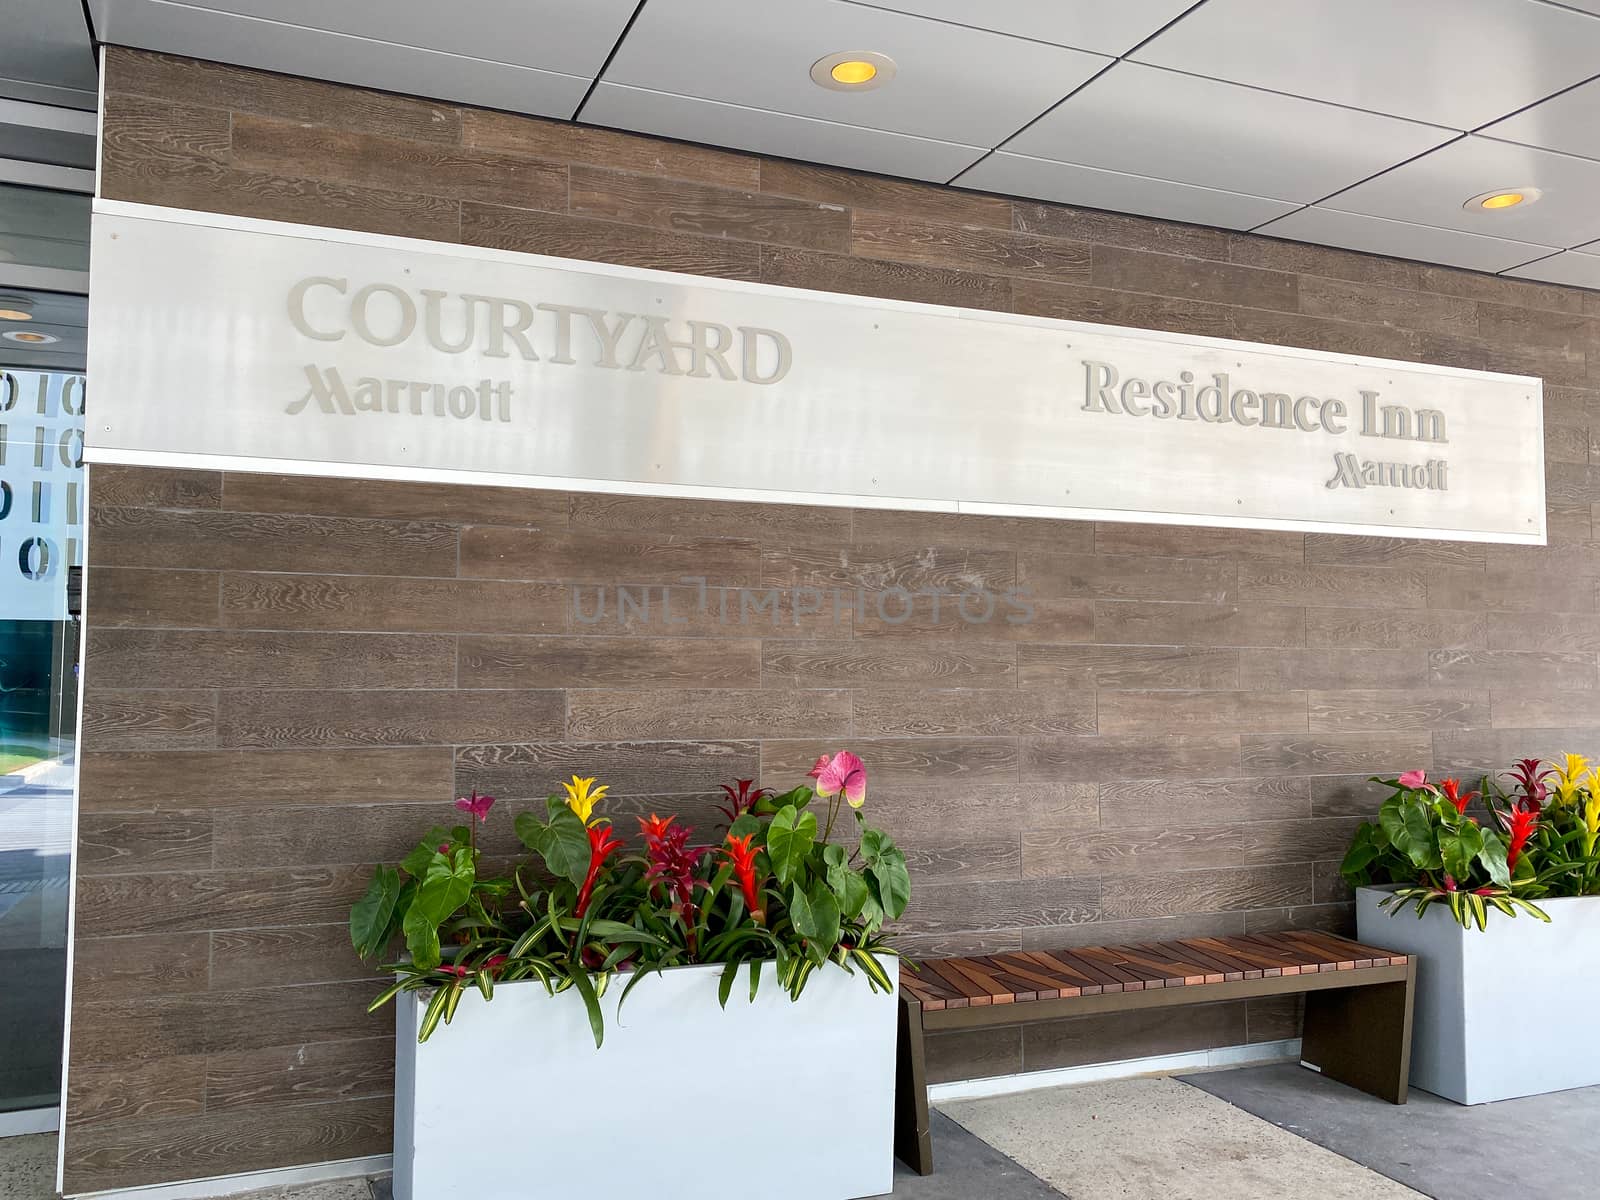 Orlando, FL/USA-4/10/20:  The exterior of a Marriott Courtyard and Residence Inn in Laureate Park Lake Nona Town Center in Orlando, Florida.